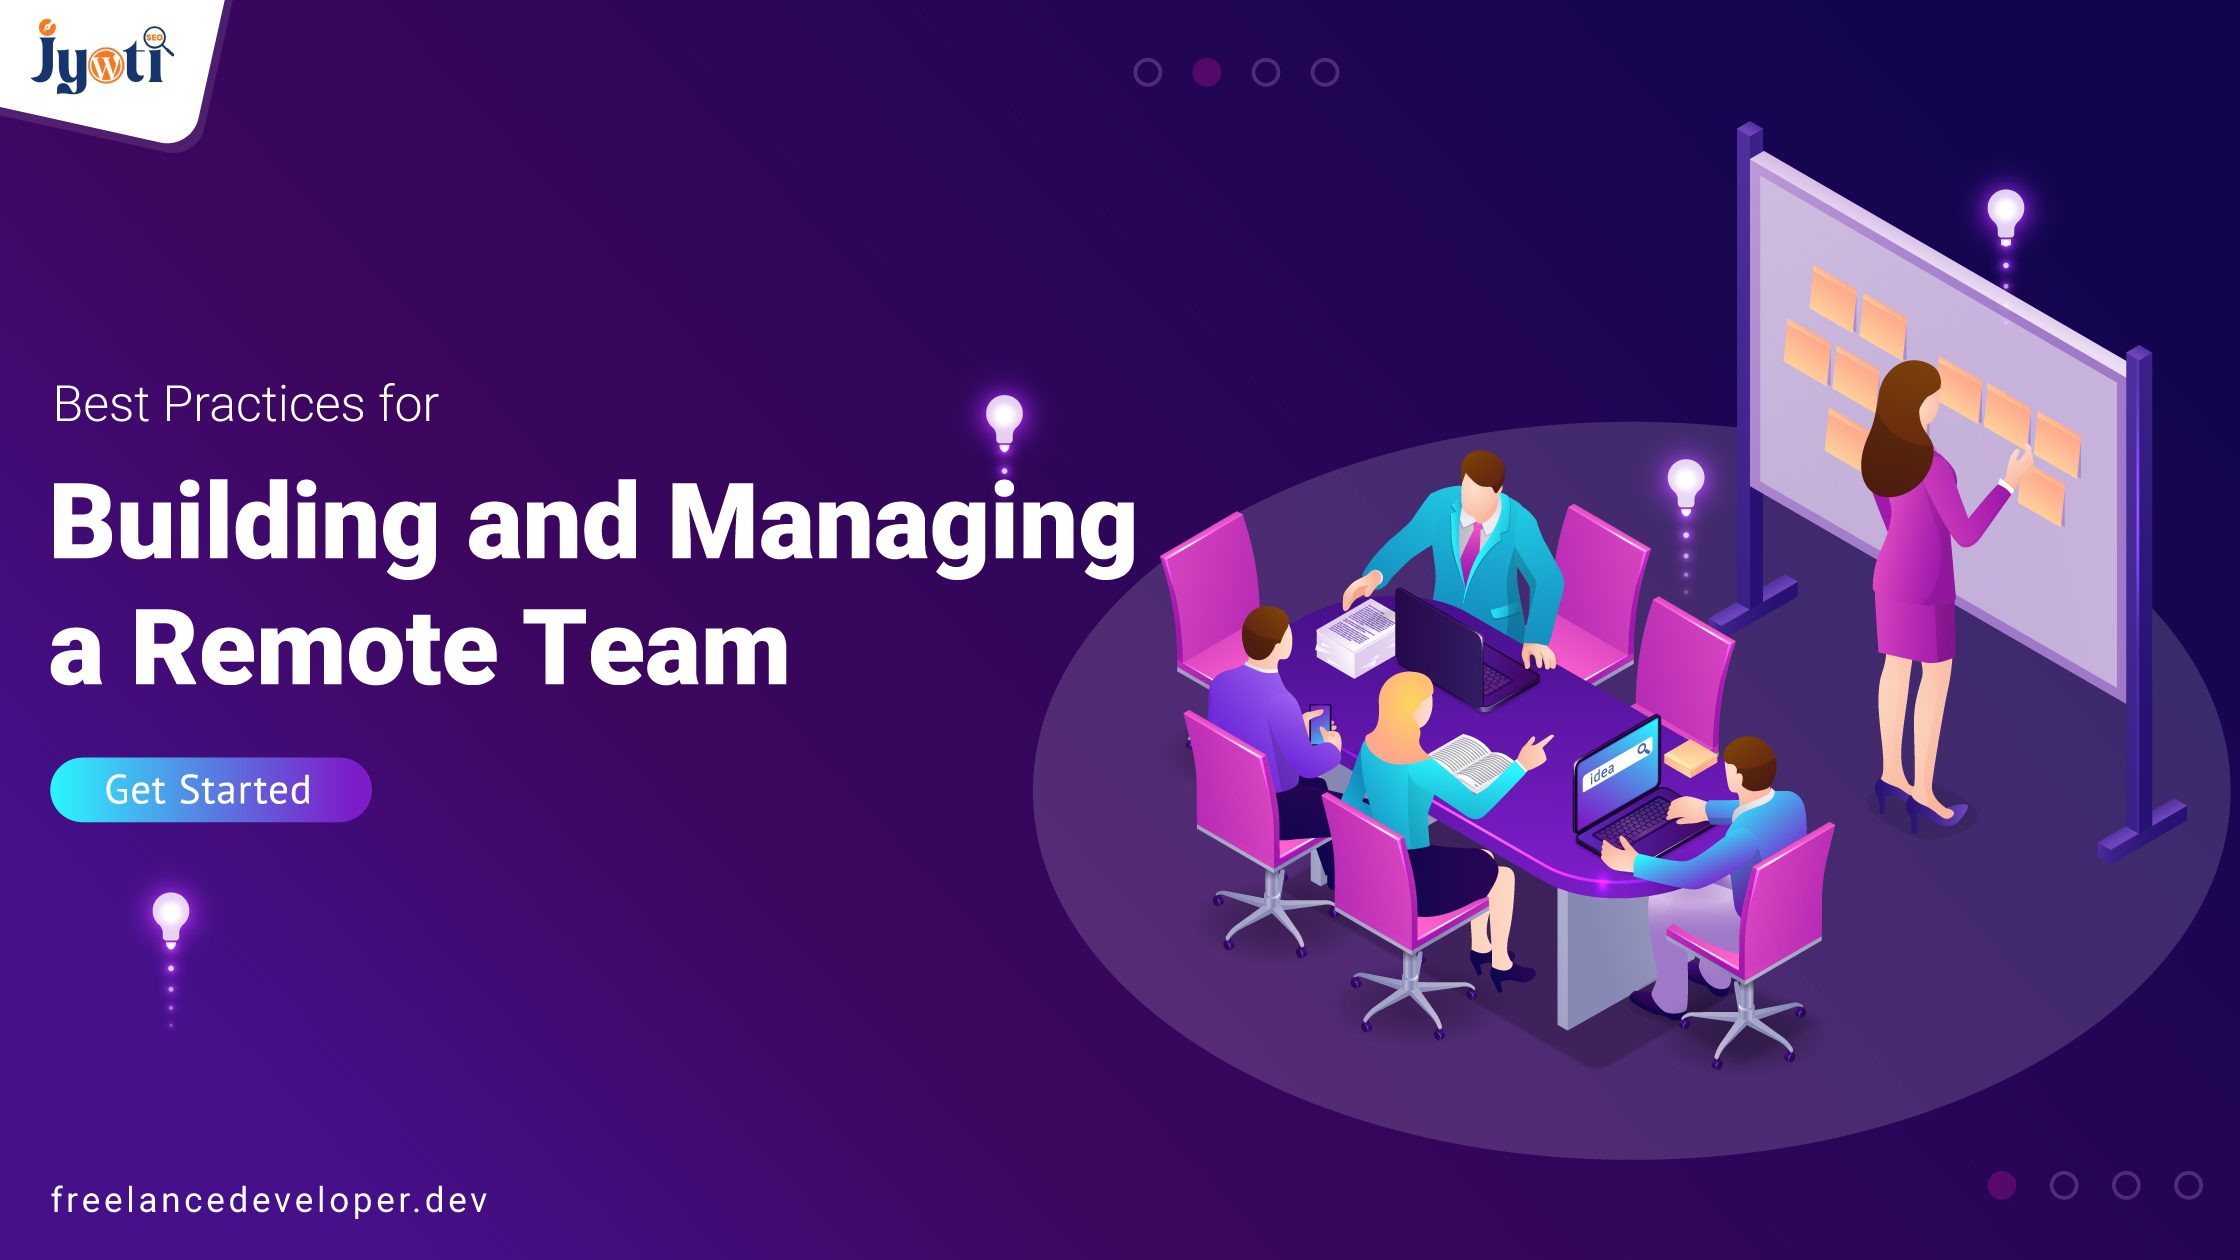 Best Practices for Building and Managing a Remote Team